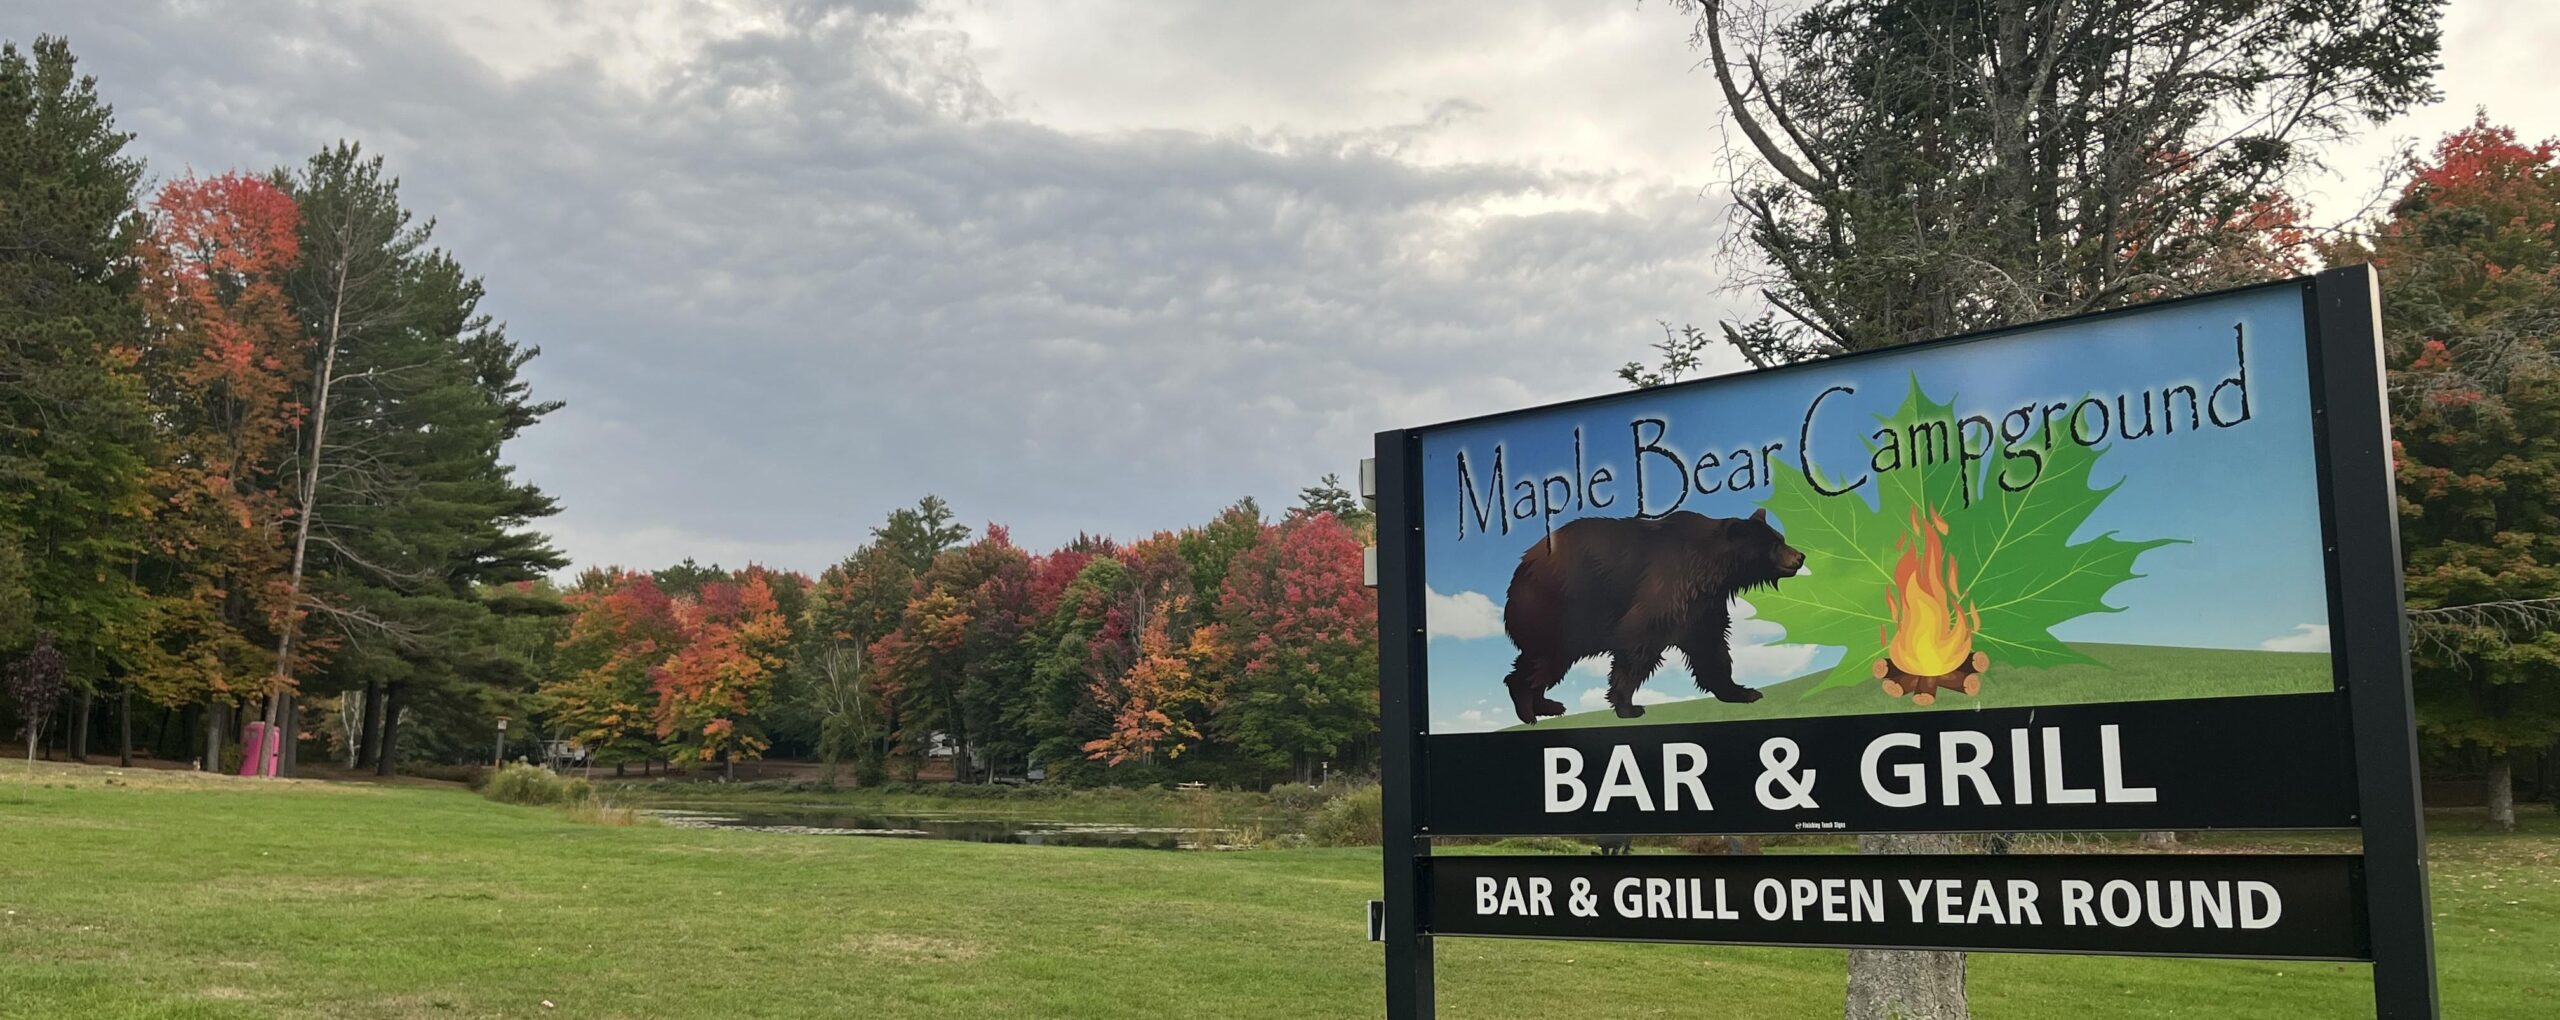 Maple Bear Campground Tomahawk, WI